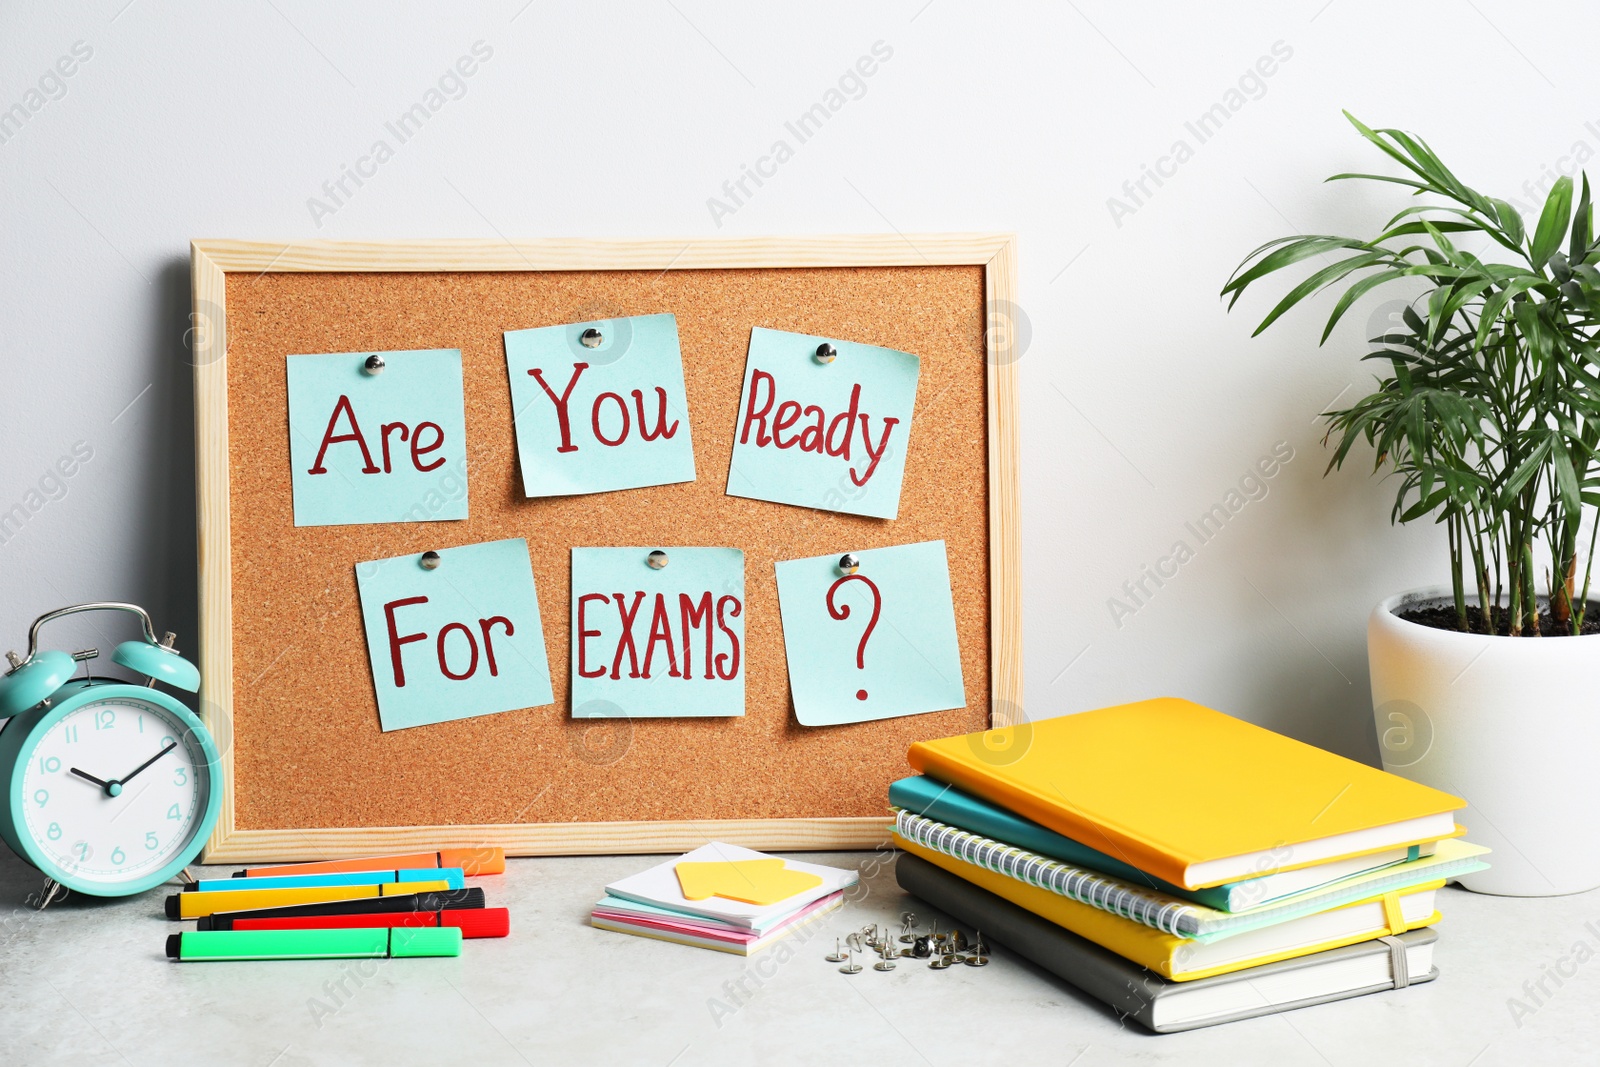 Photo of Cork board with question Are You Ready For Exams made of sticky notes on table